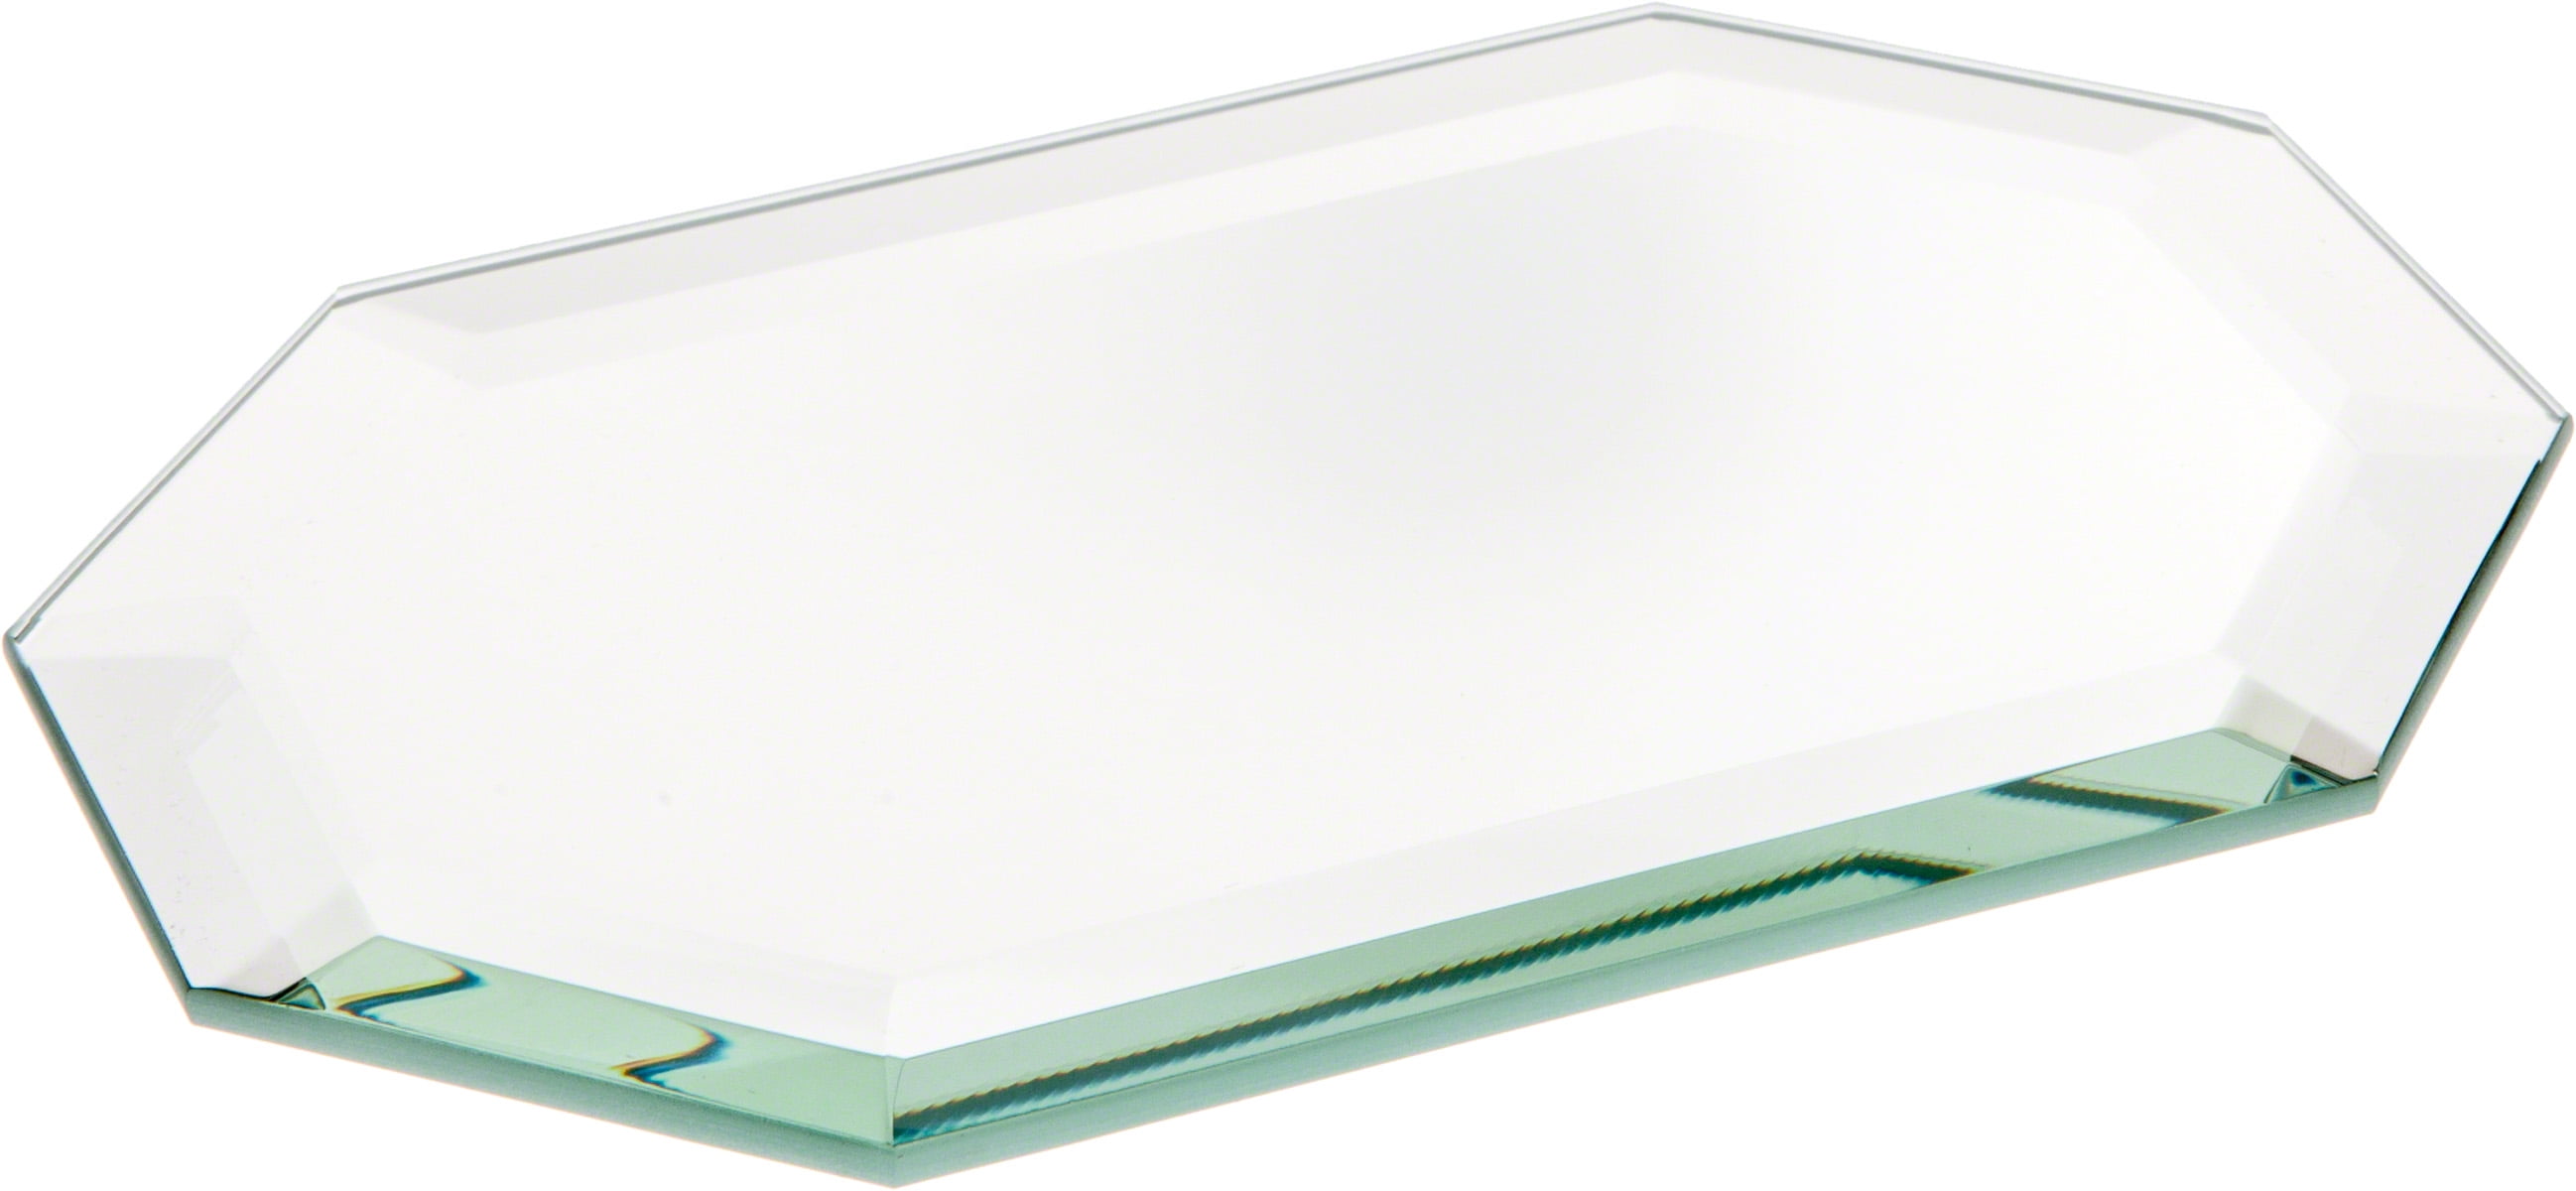 Pack of 24 Plymor Square 3mm Beveled Glass Mirror 6 inch x 6 inch 